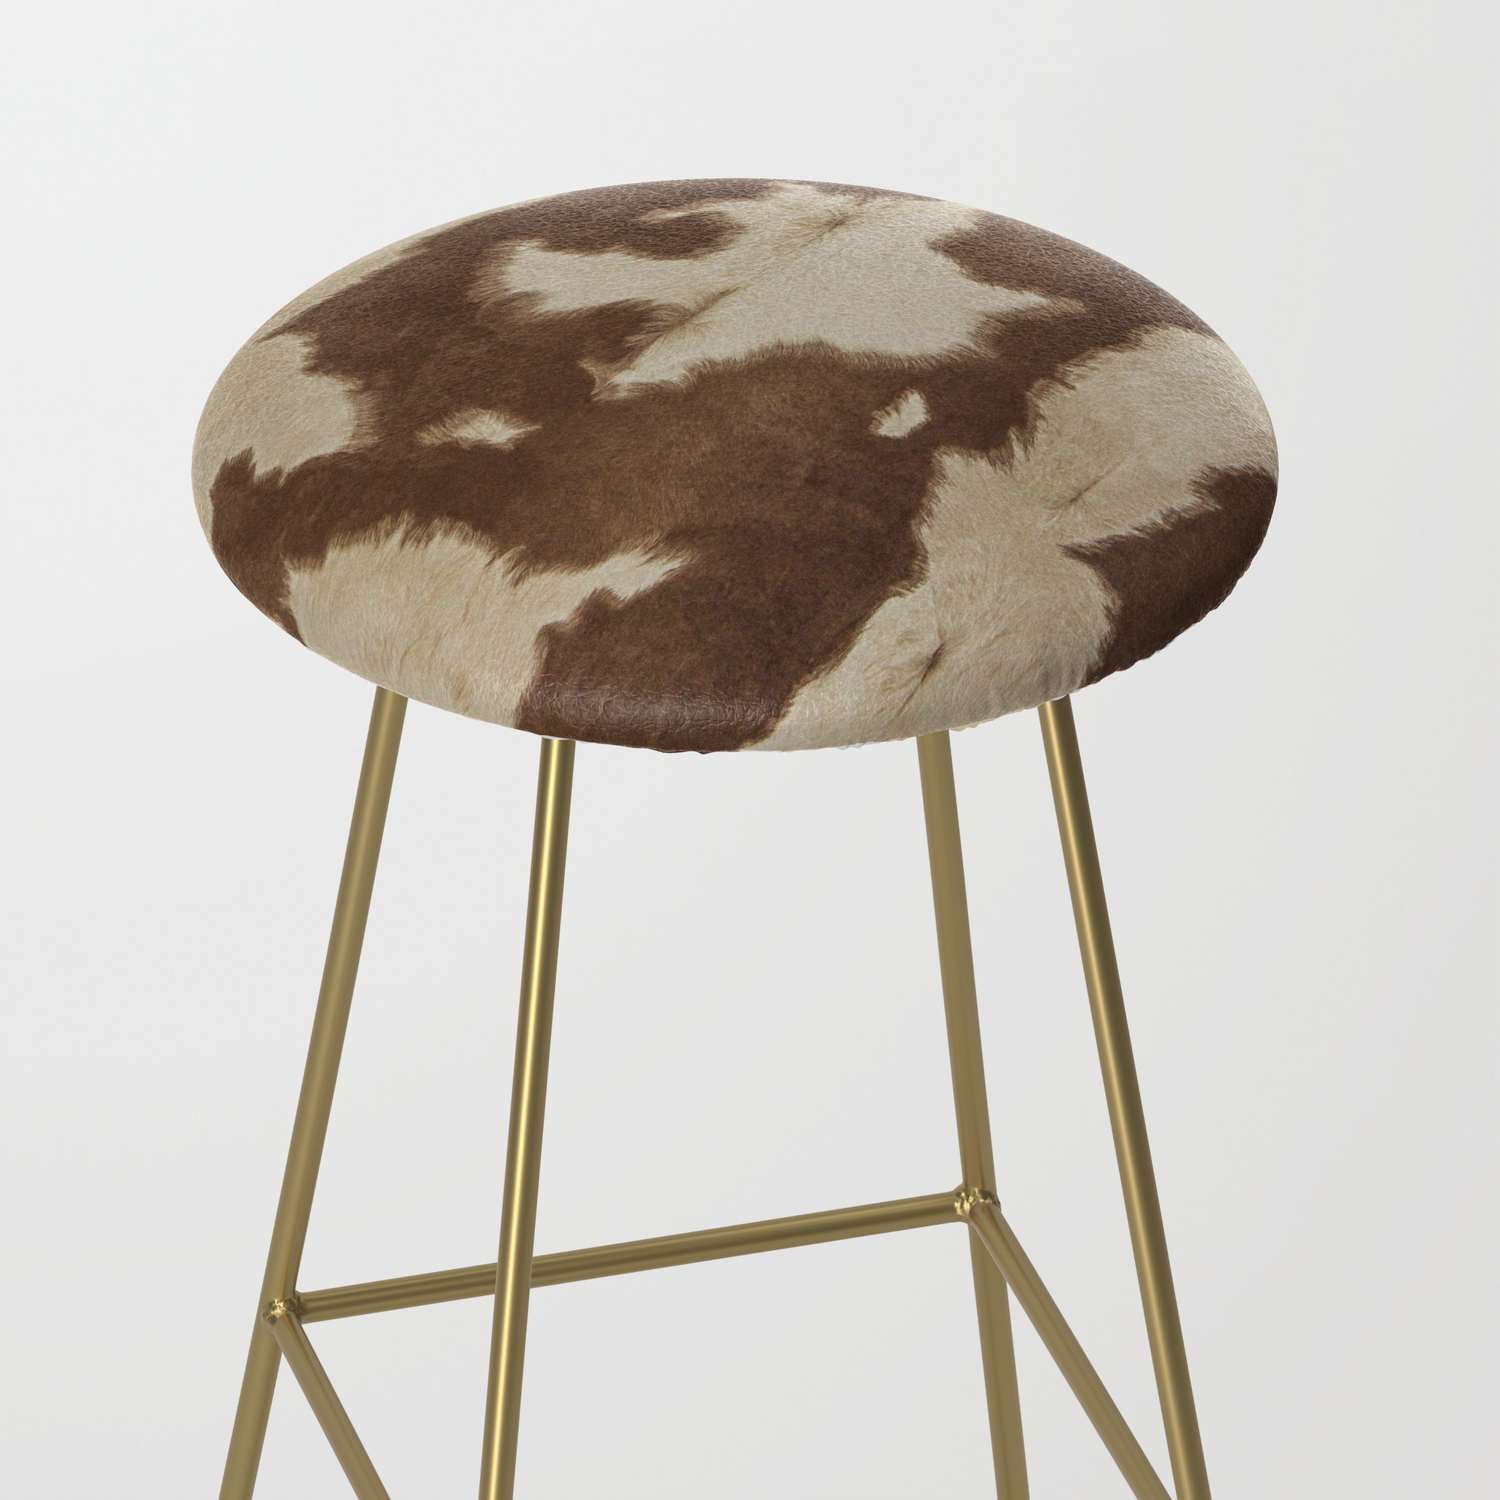 Brown And White Cowhide 3 Bar Stool By, Black And White Cowhide Bar Stools